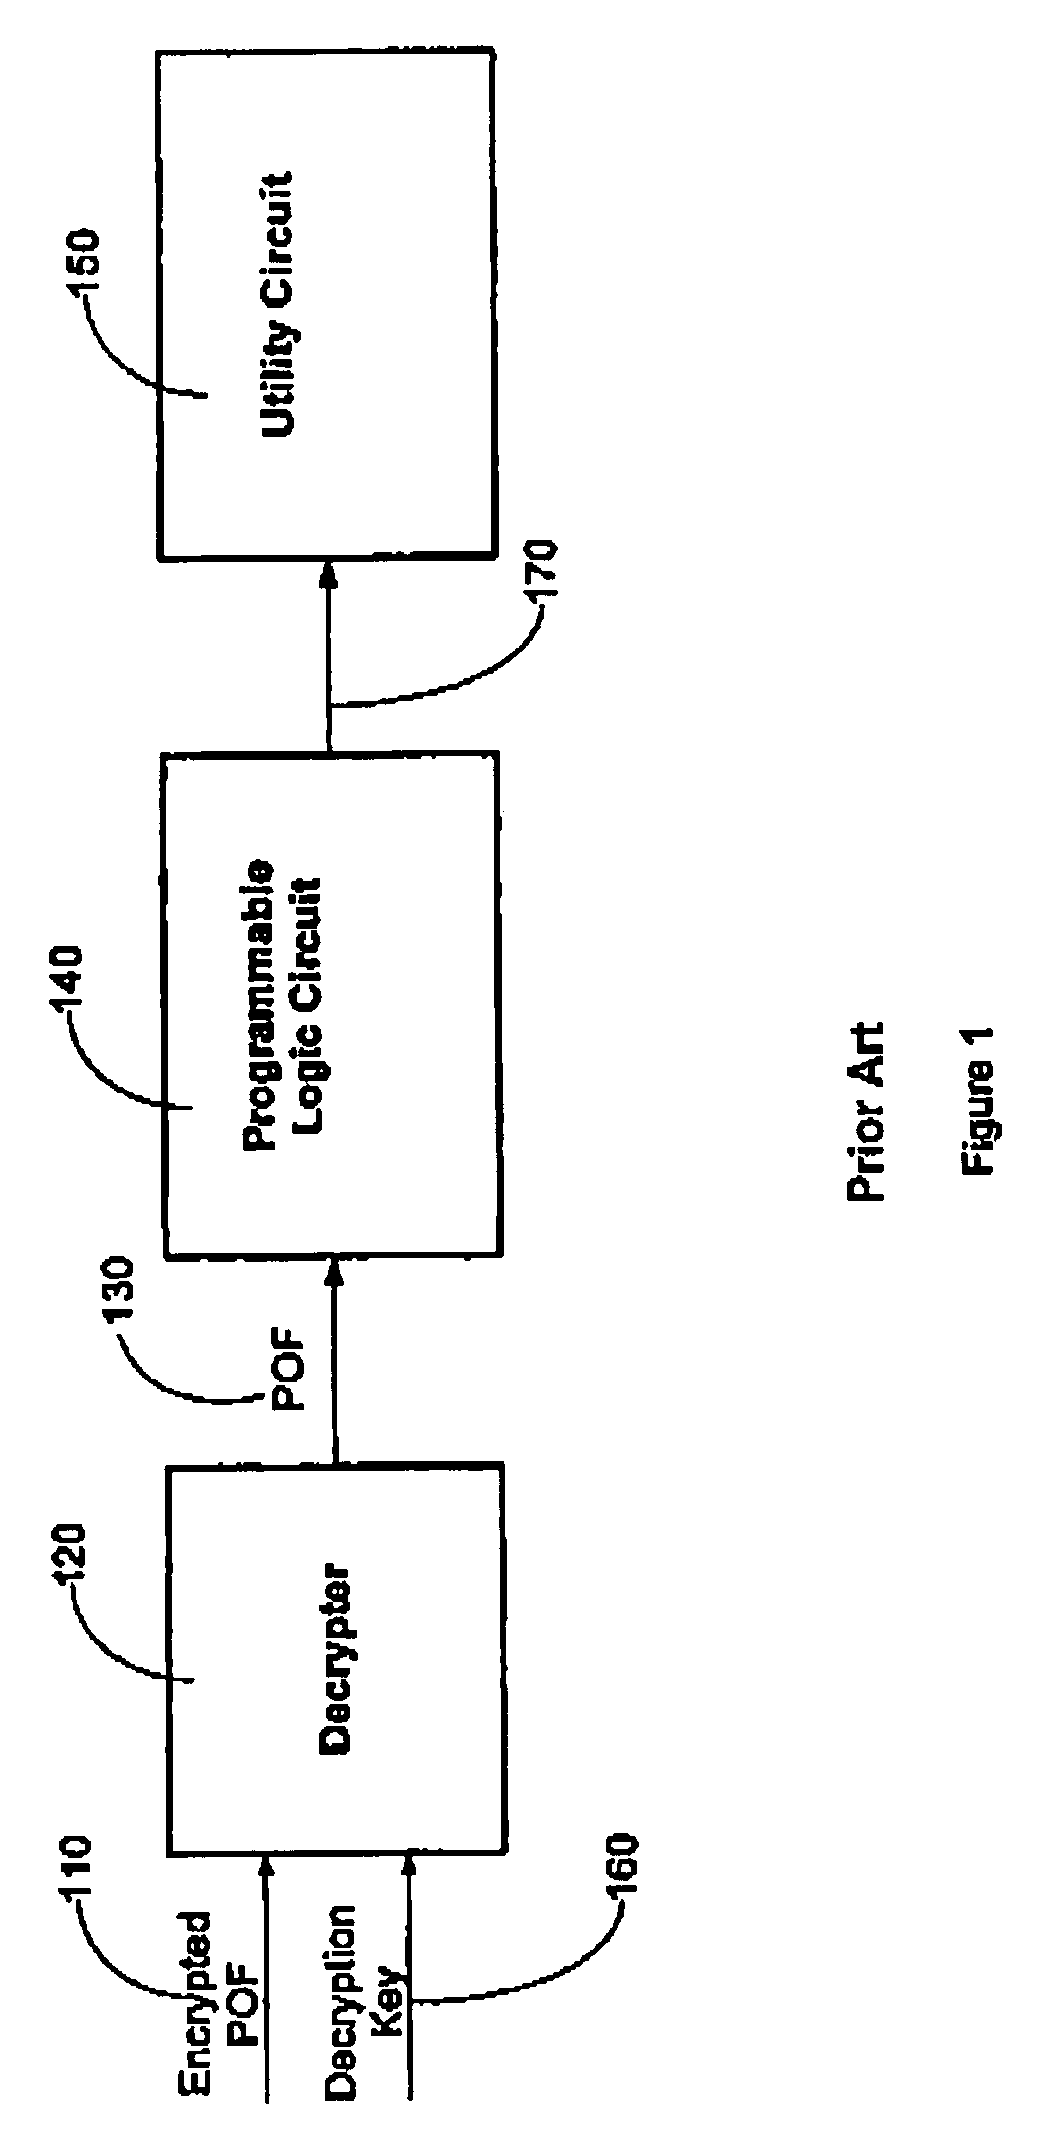 Methods and systems for achieving improved intellectual property protection for programmable logic devices